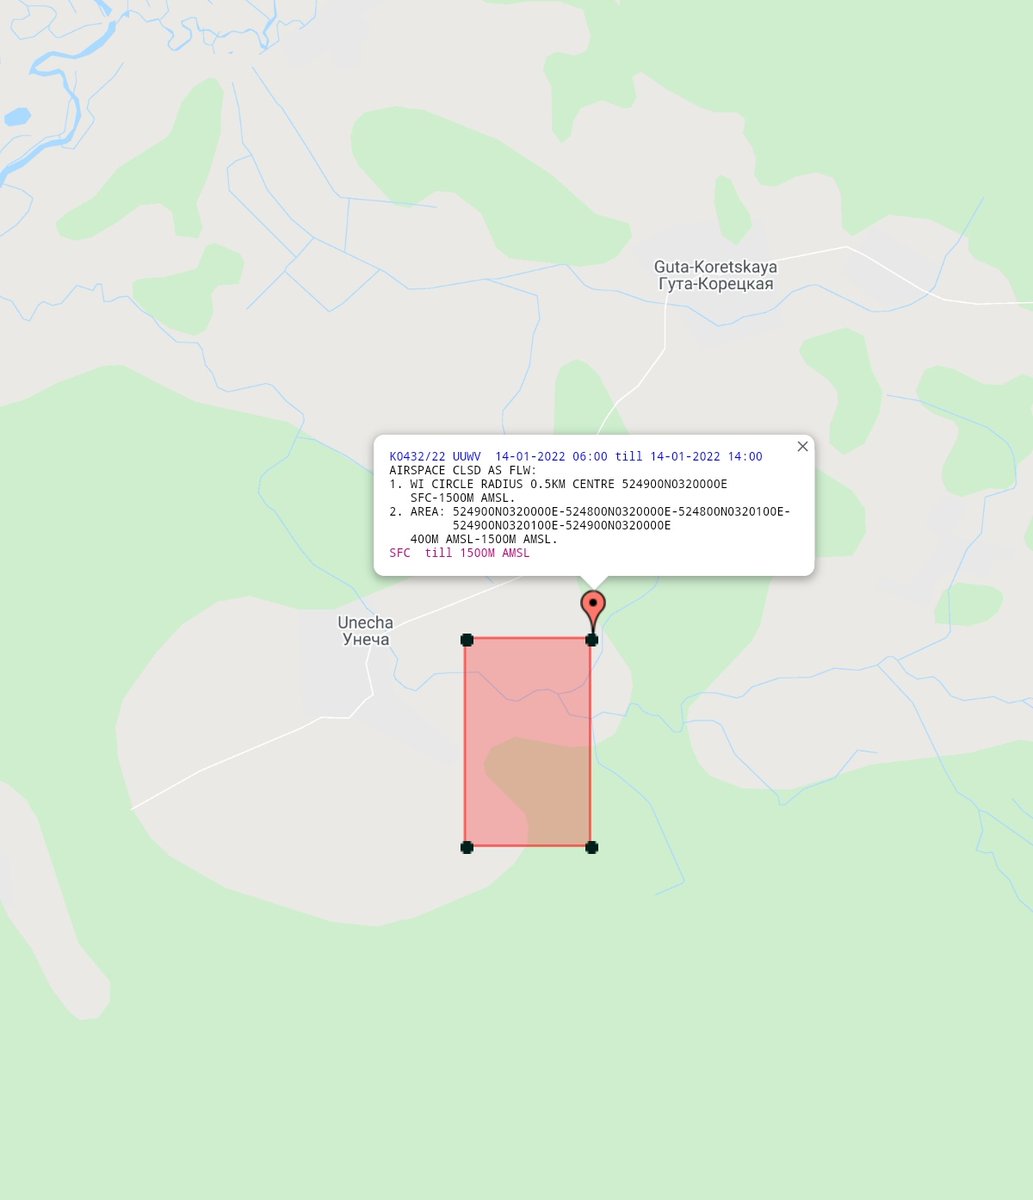 A two-part NOTAM, issued for the training ground near Unecha, NW of Klintsy - Bryansk Oblast on the 14th.  This indicates possible exercise activity there